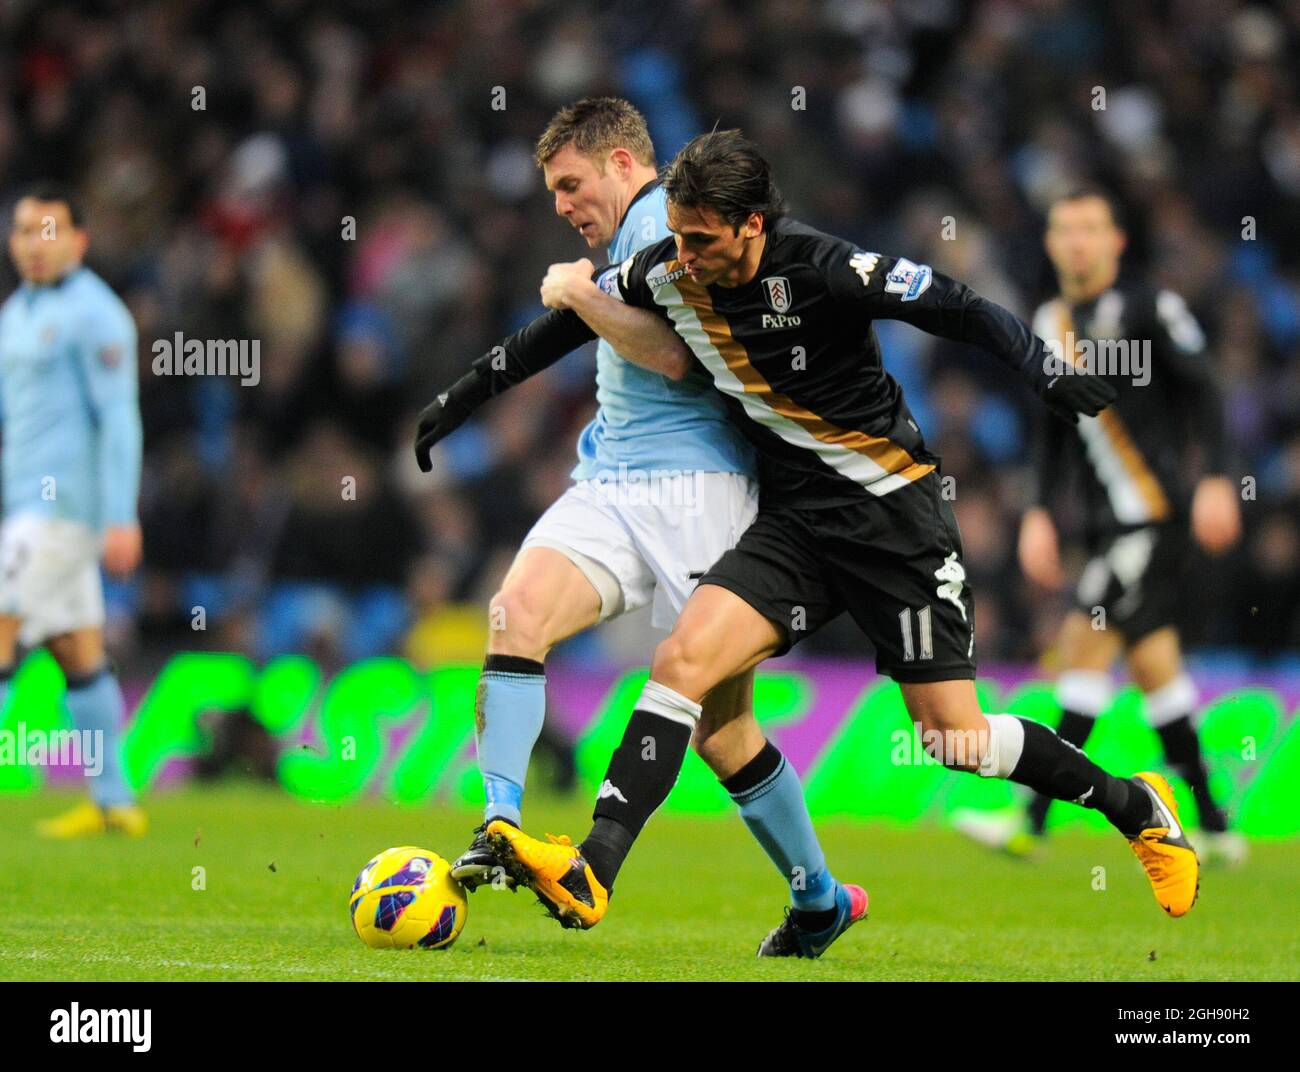 Gareth Barry of Manchester City tussles with Bryan Ruiz of Fulham during the Barclays Premier League soccer match between Manchester City and Fulham at Etihad Stadium in Manchester, United Kingdom on January 19, 2013. Picture Simon Bellis Stock Photo